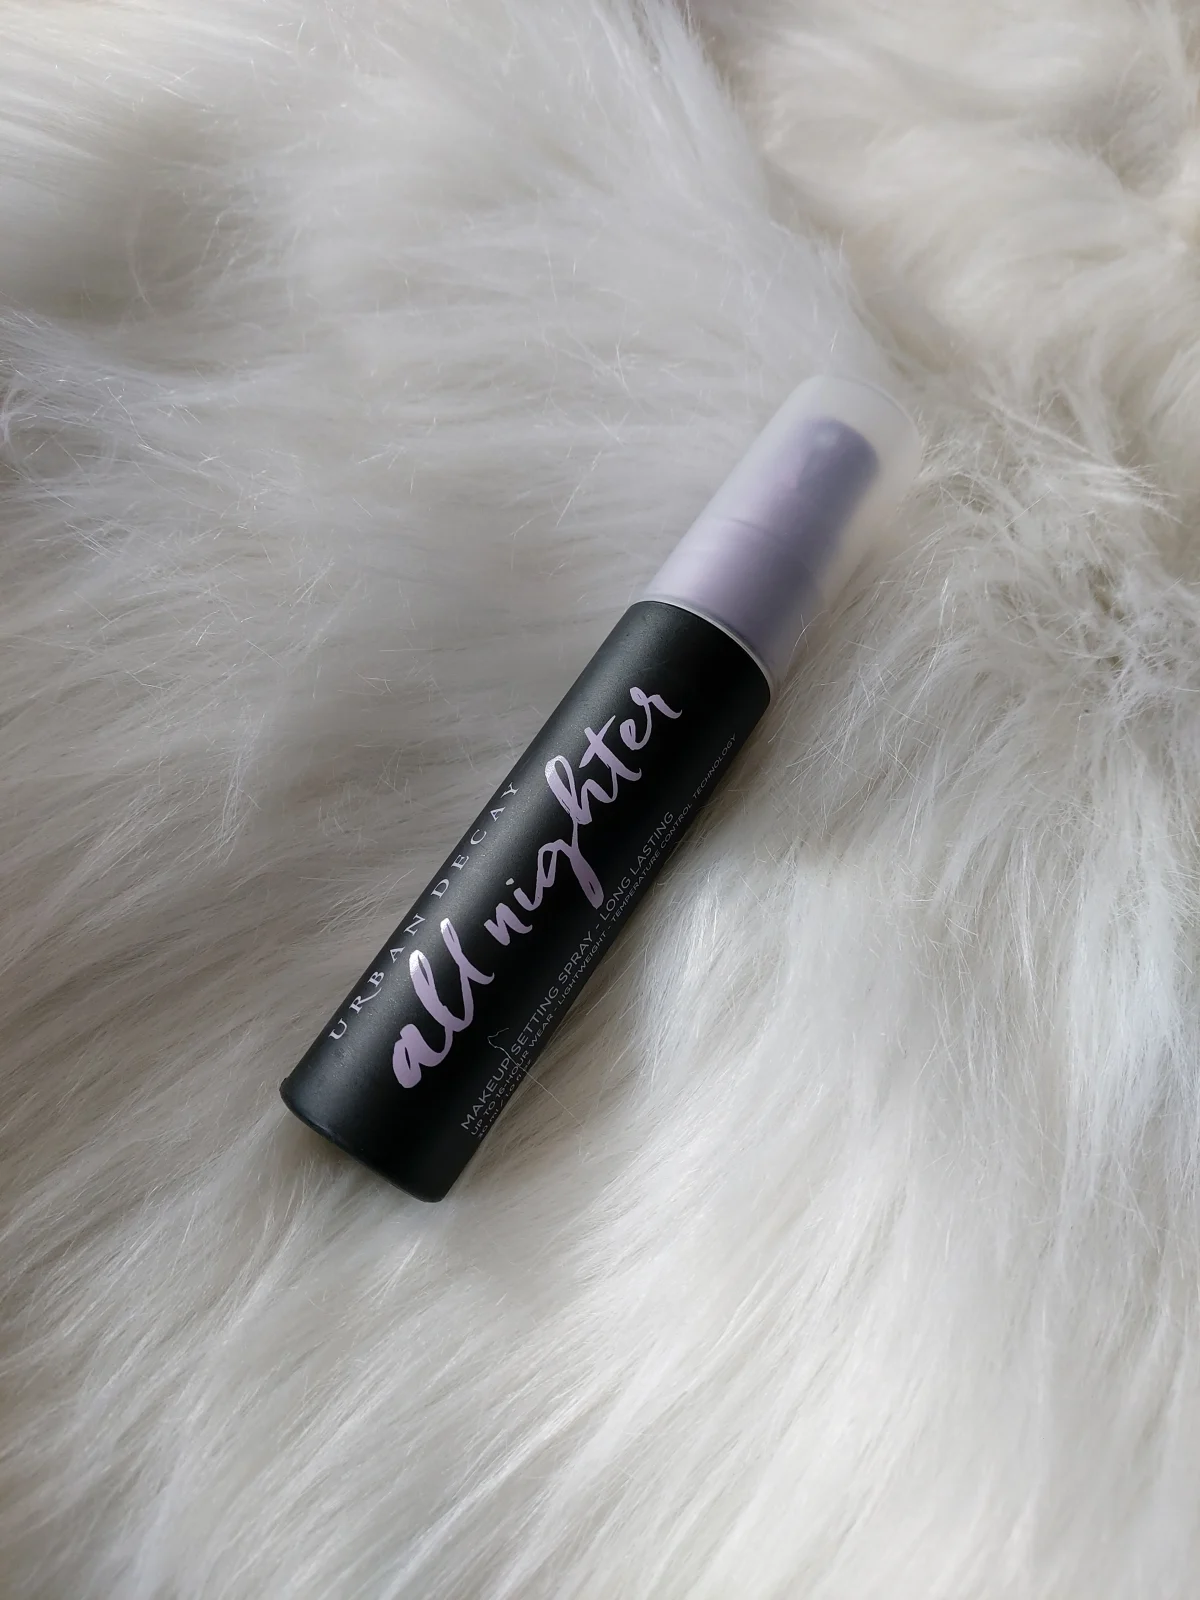 Haarspray Urban Decay All Nighter Make-up 118 ml - review image